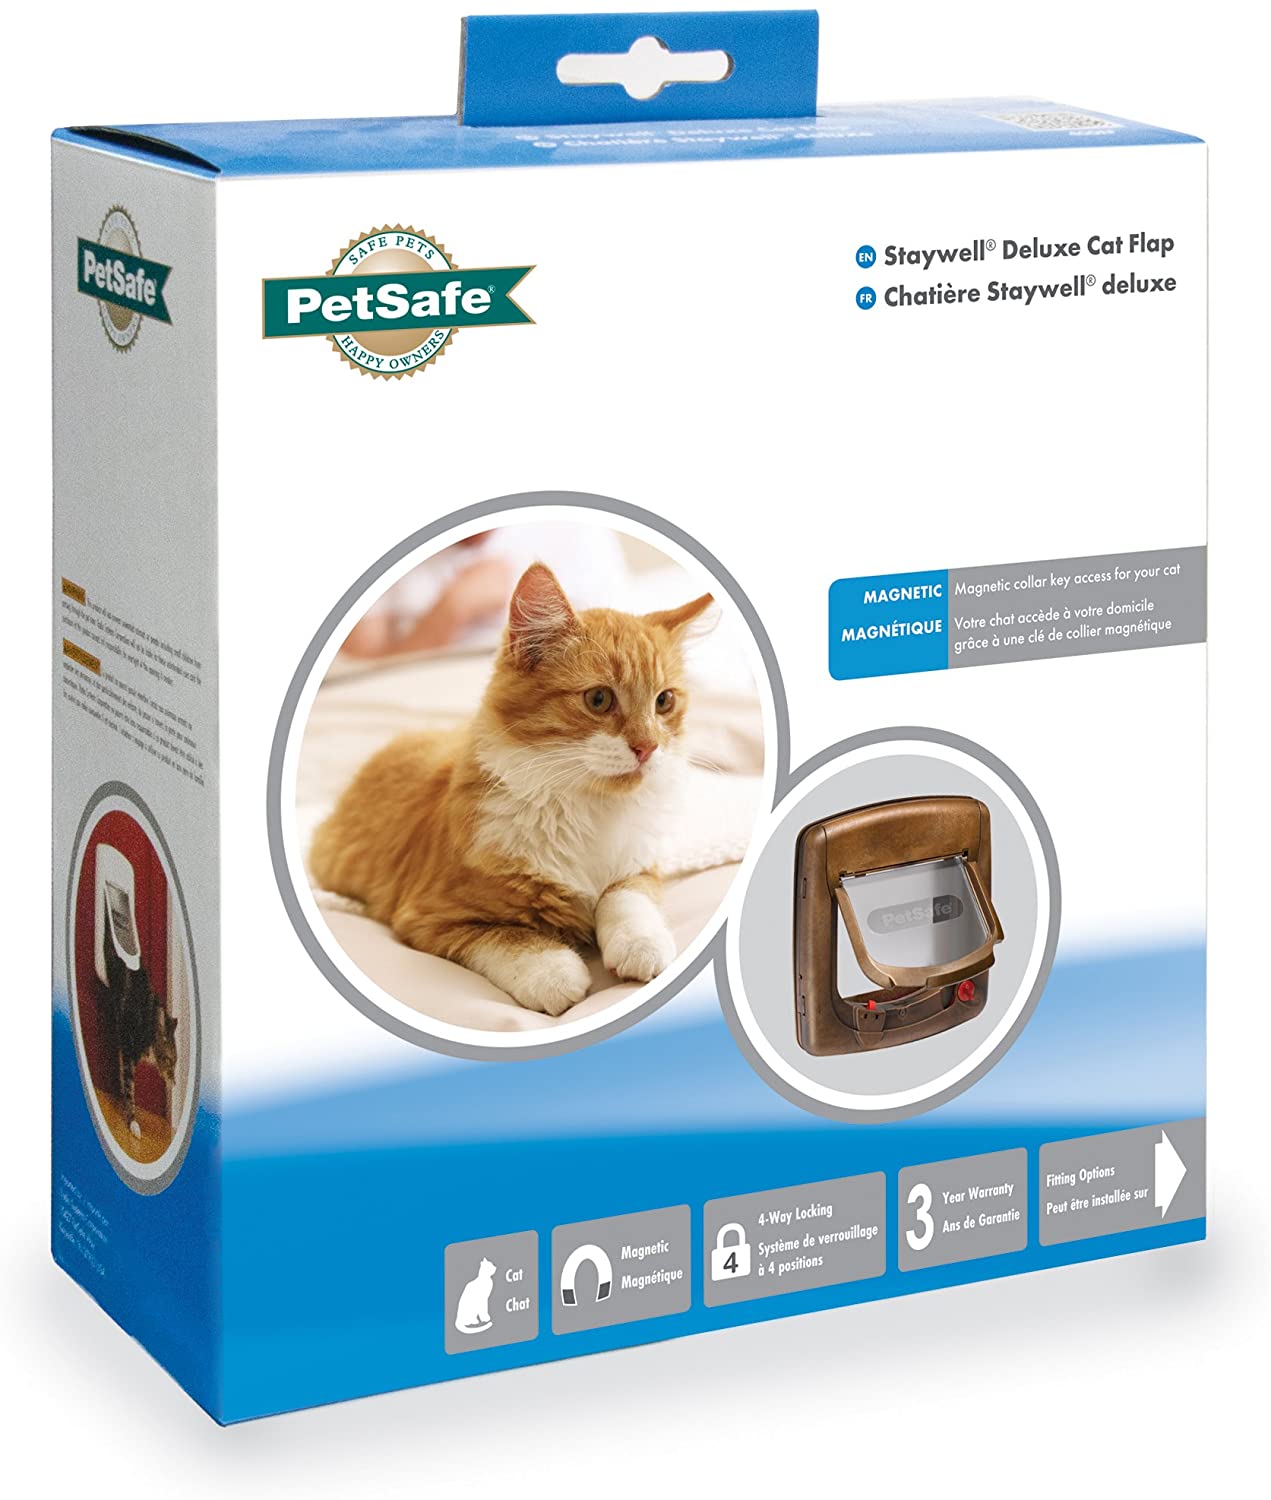  PetSafe - Staywell Deluxe - Gatera magnética. 